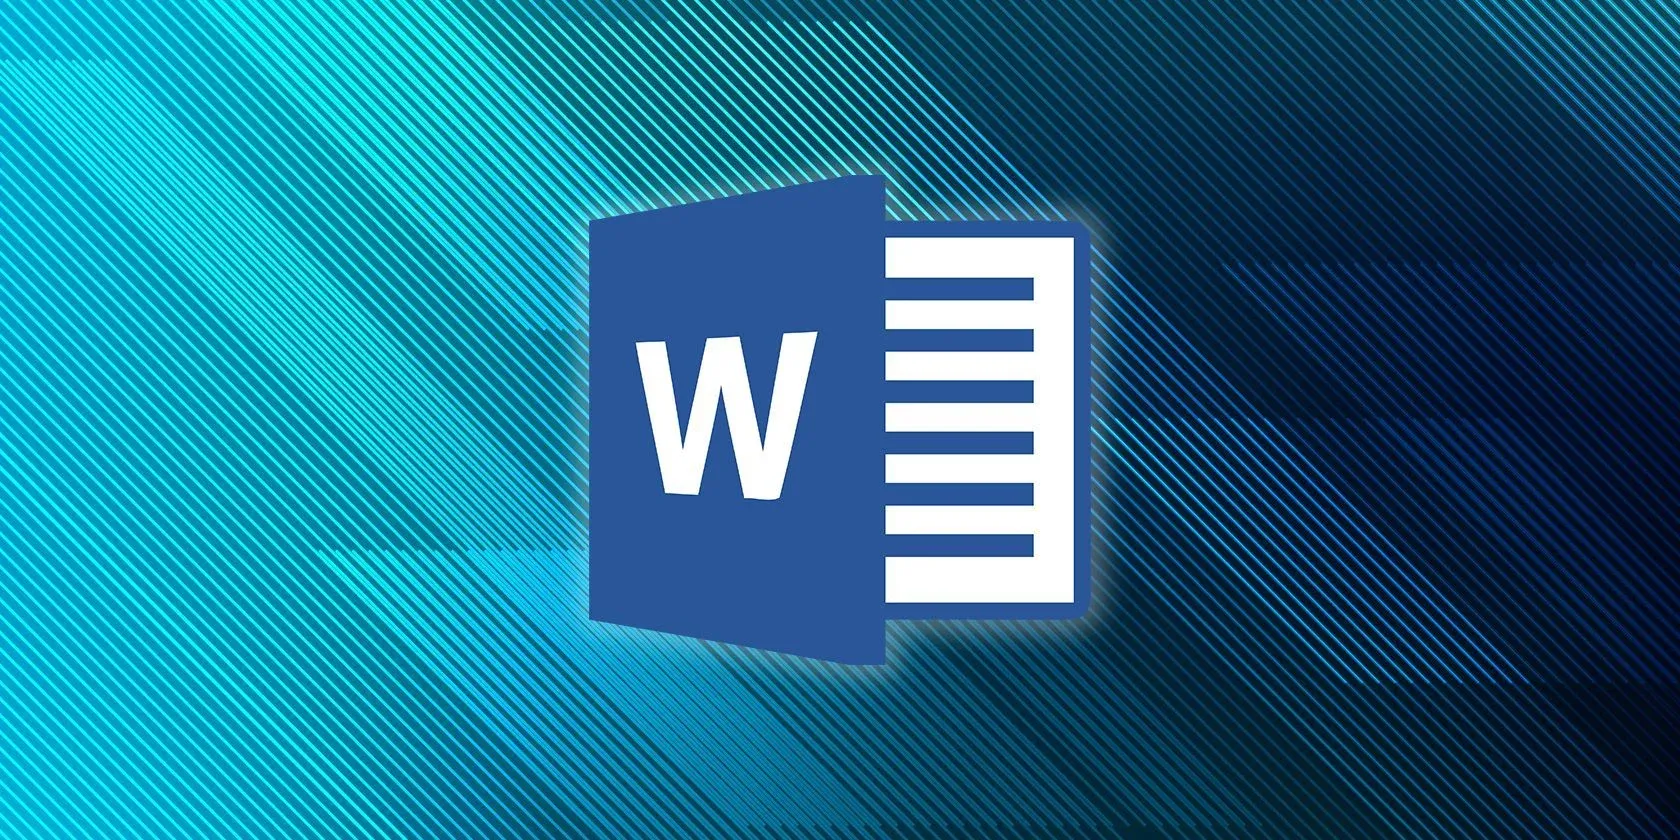 How to Fix the "Word Cannot Complete the Save Due to a File Permission Error" Issue on Windows